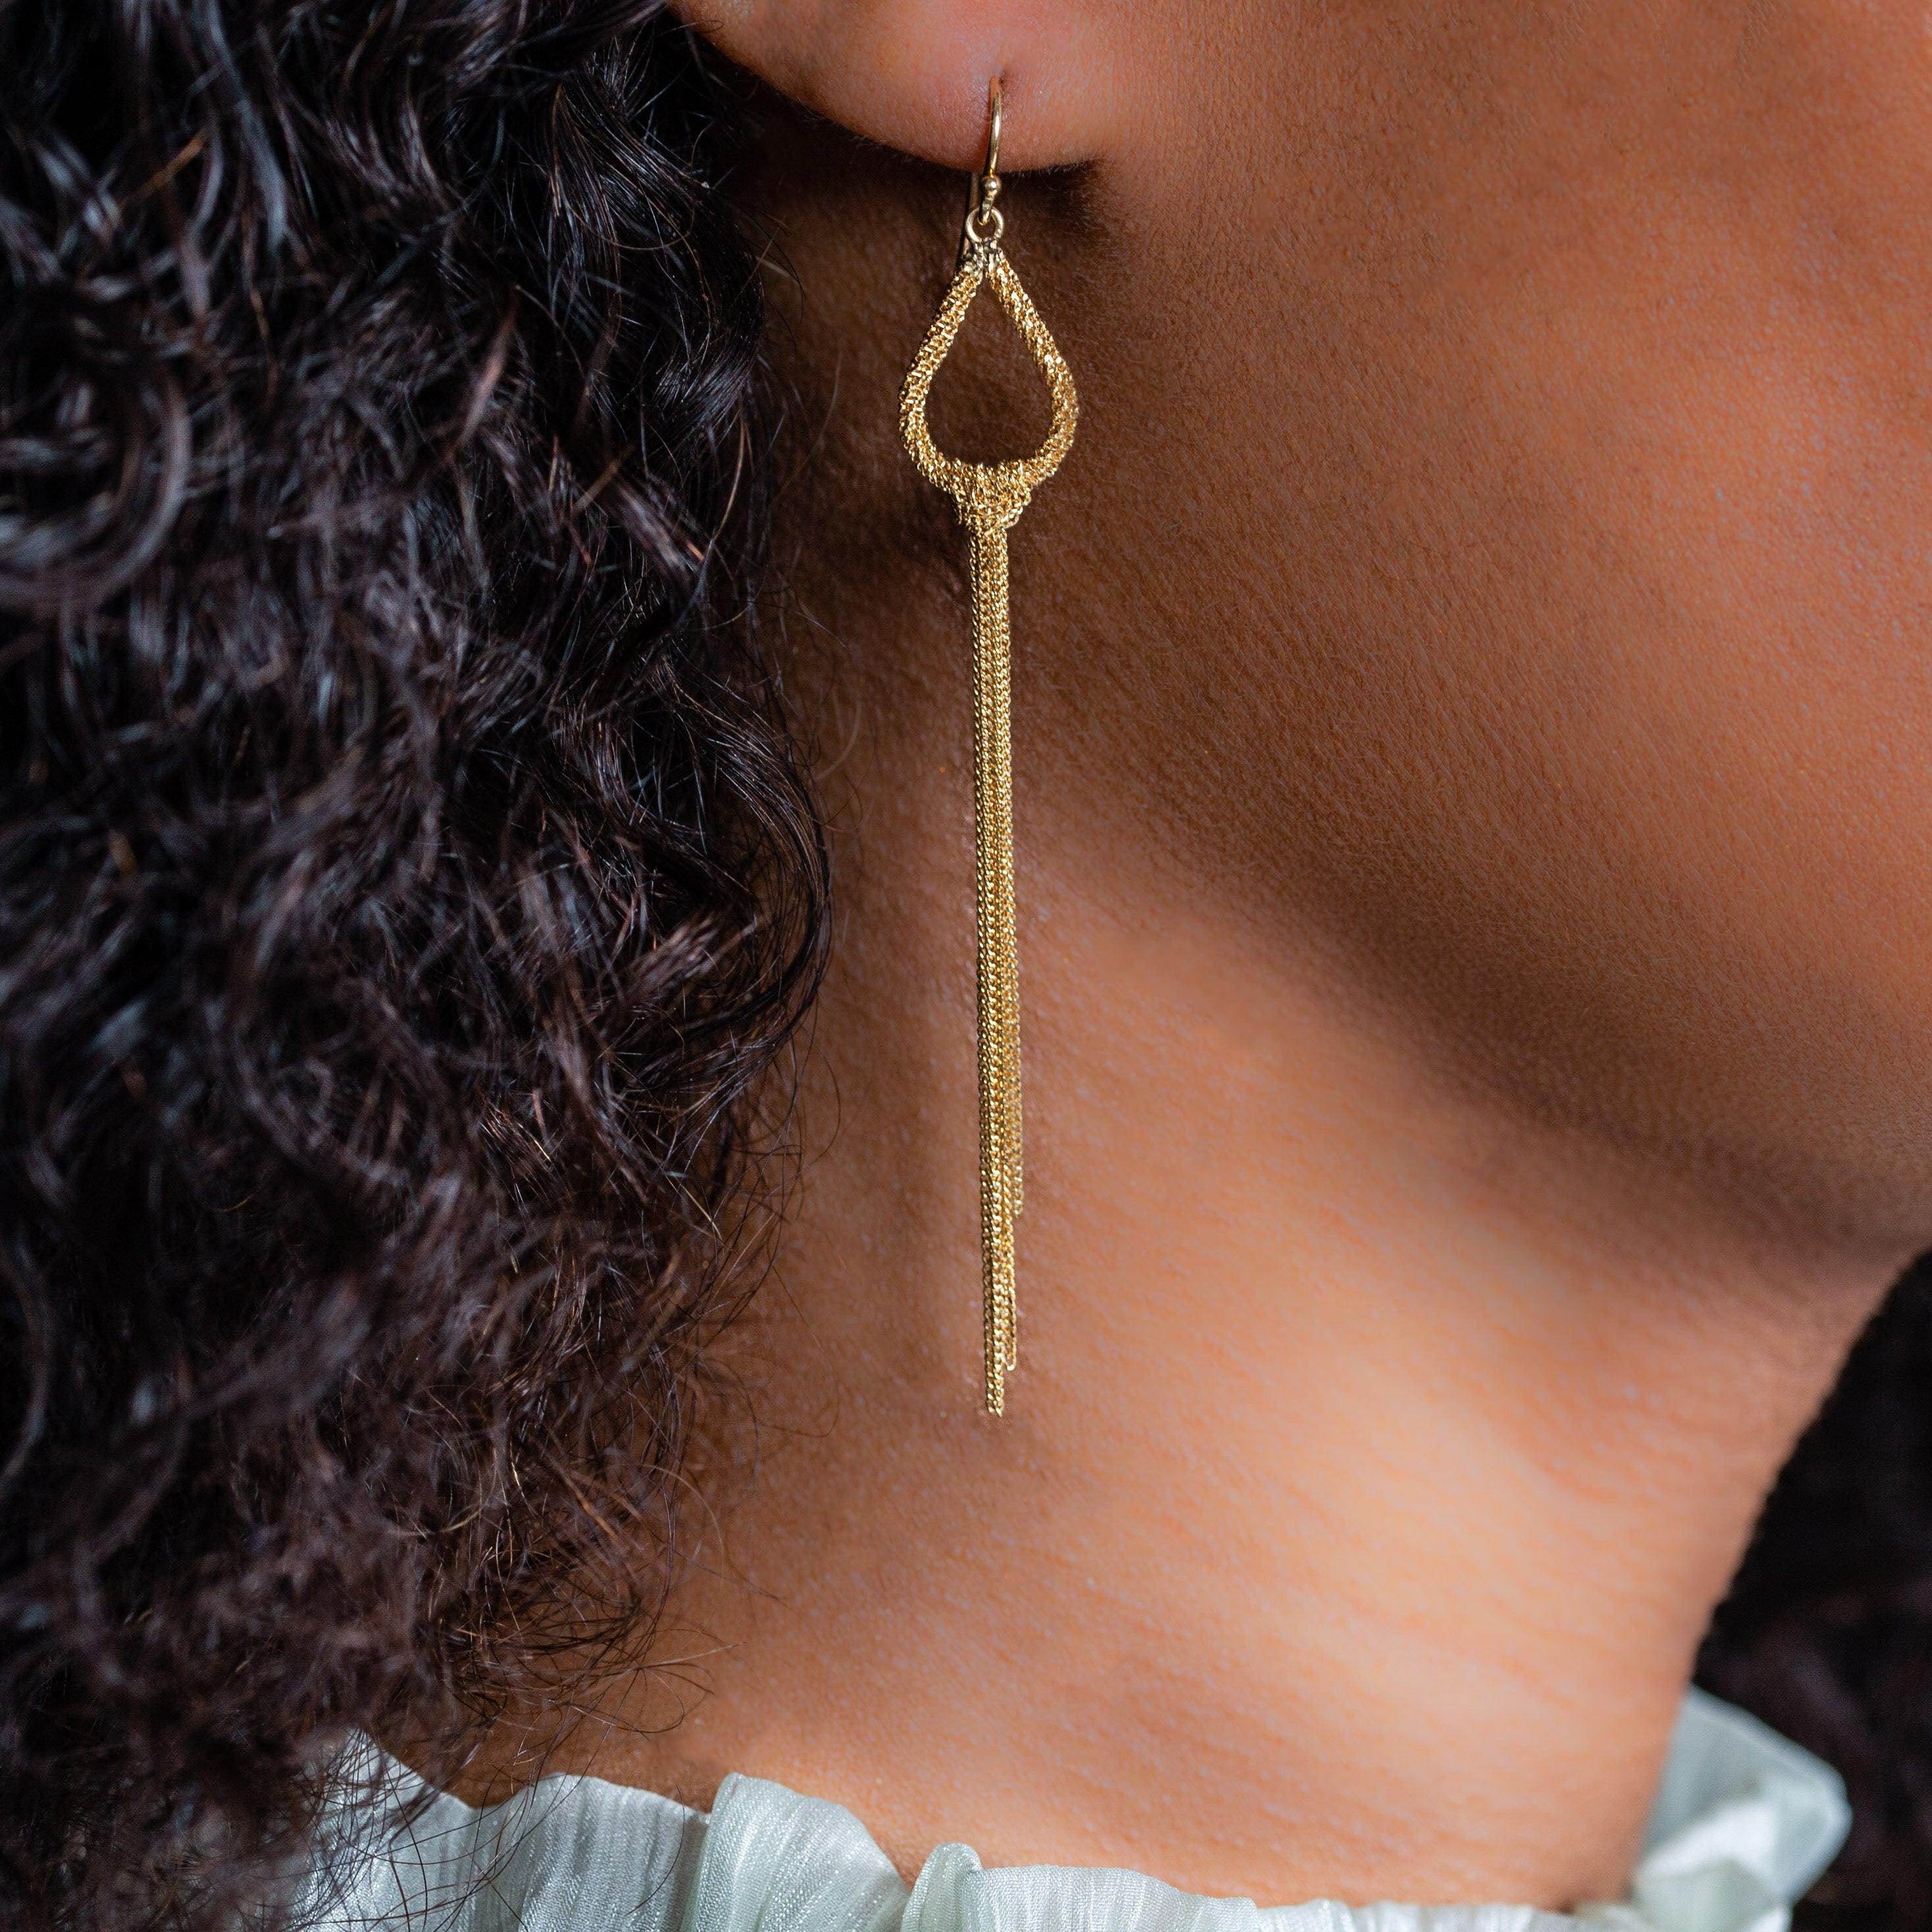 These tantalizing tassel earrings begin with a light and lovely open pear shape of hand-woven 18K yellow gold. A bundle of gold chain is then looped around the curved base of each pear, cascading downward in a bright banner of precious metal that